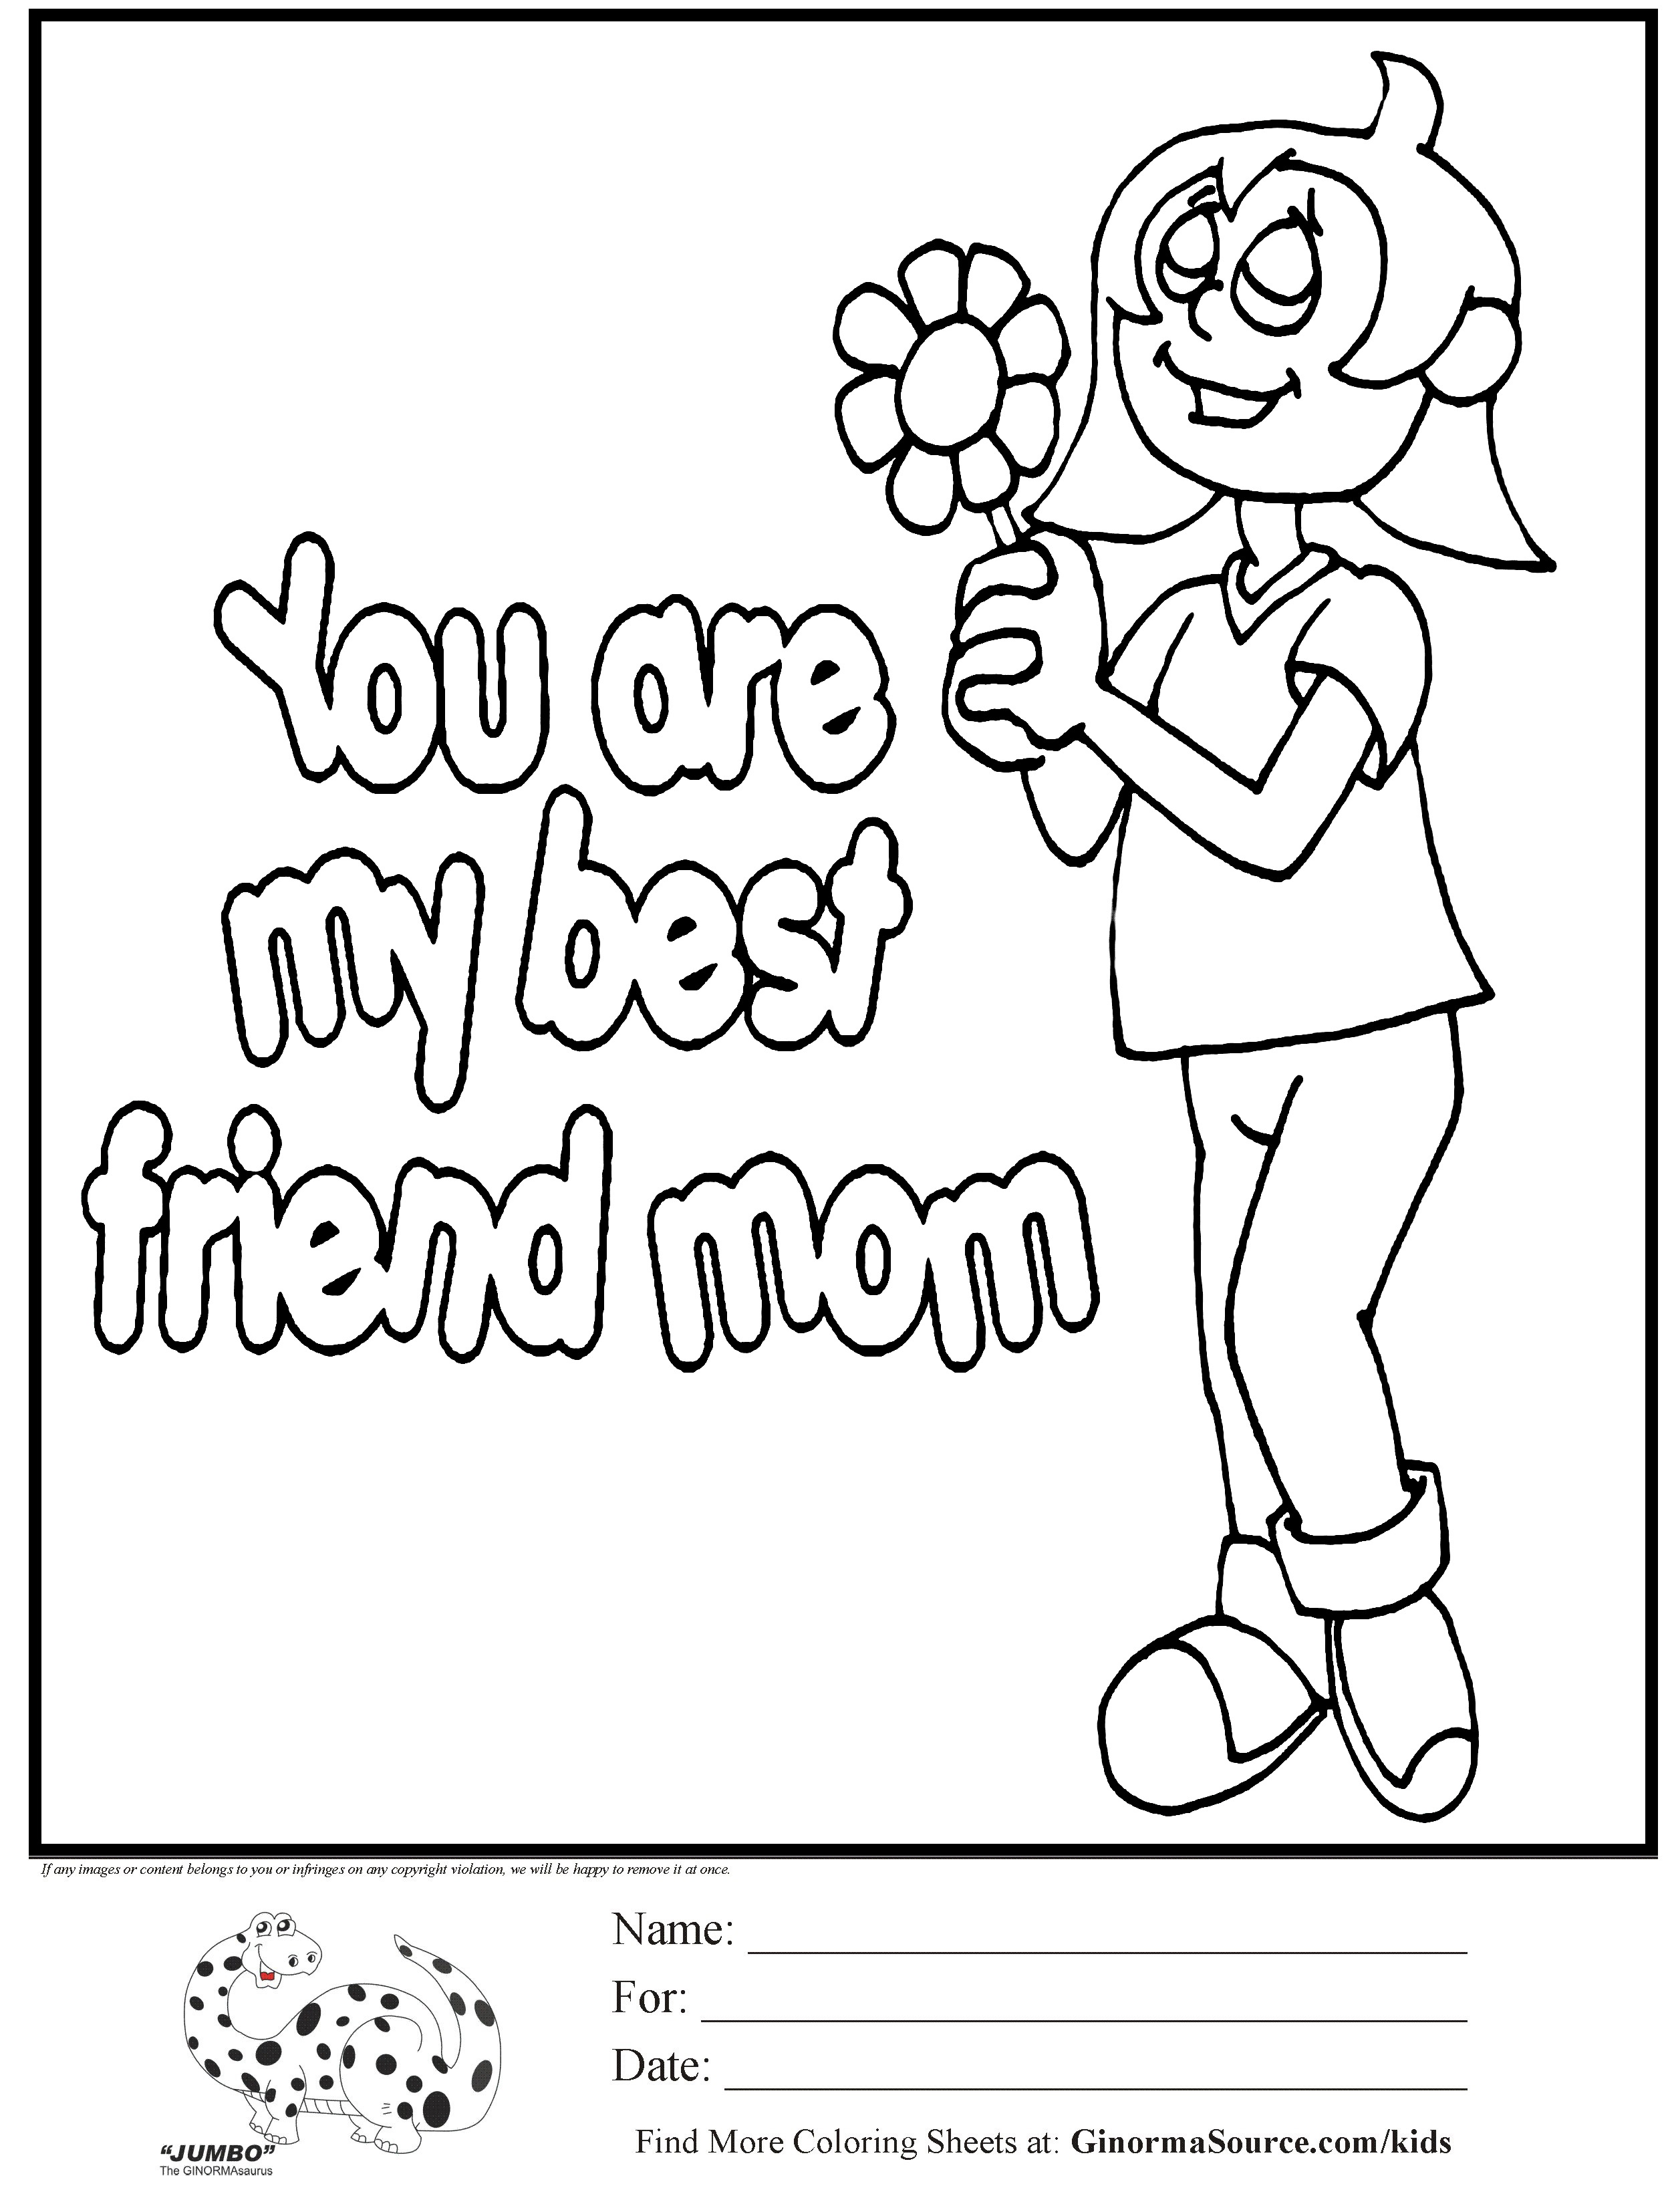 I Love You Mom Coloring Pages at GetColorings.com | Free printable